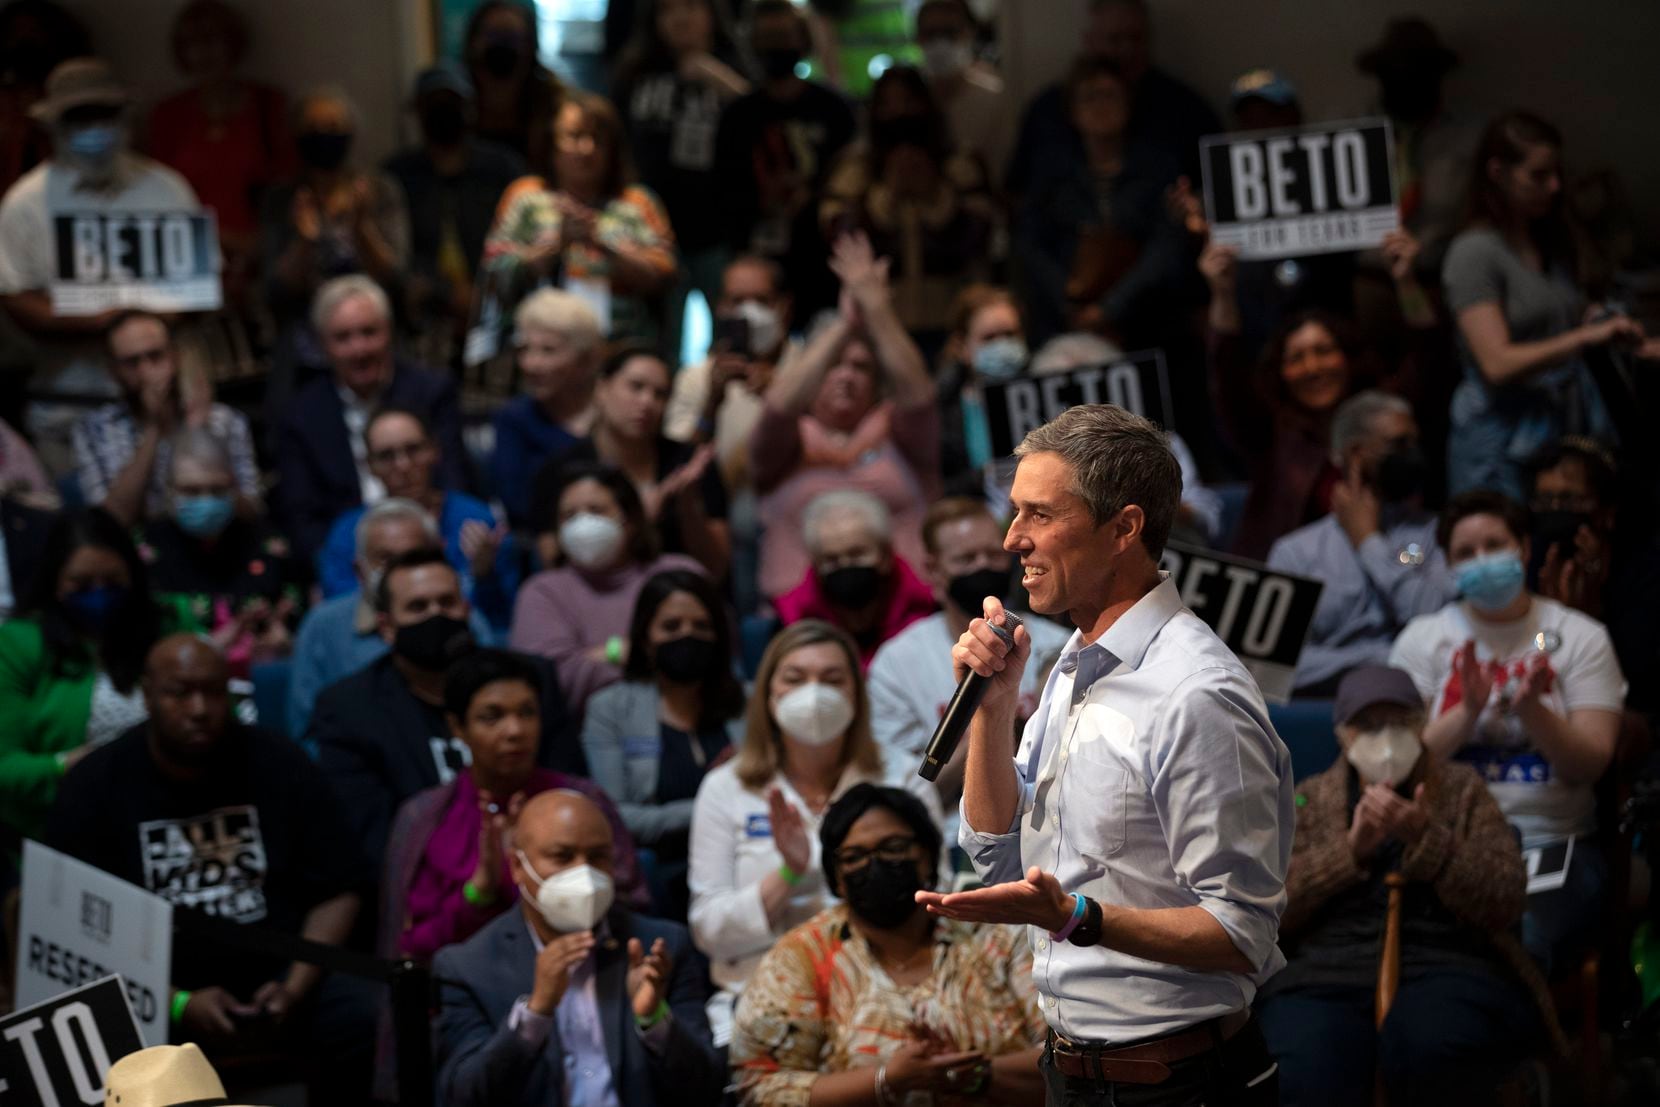 Beto O’Rourke kicks off his People of Texas campaign with an education town hall at...